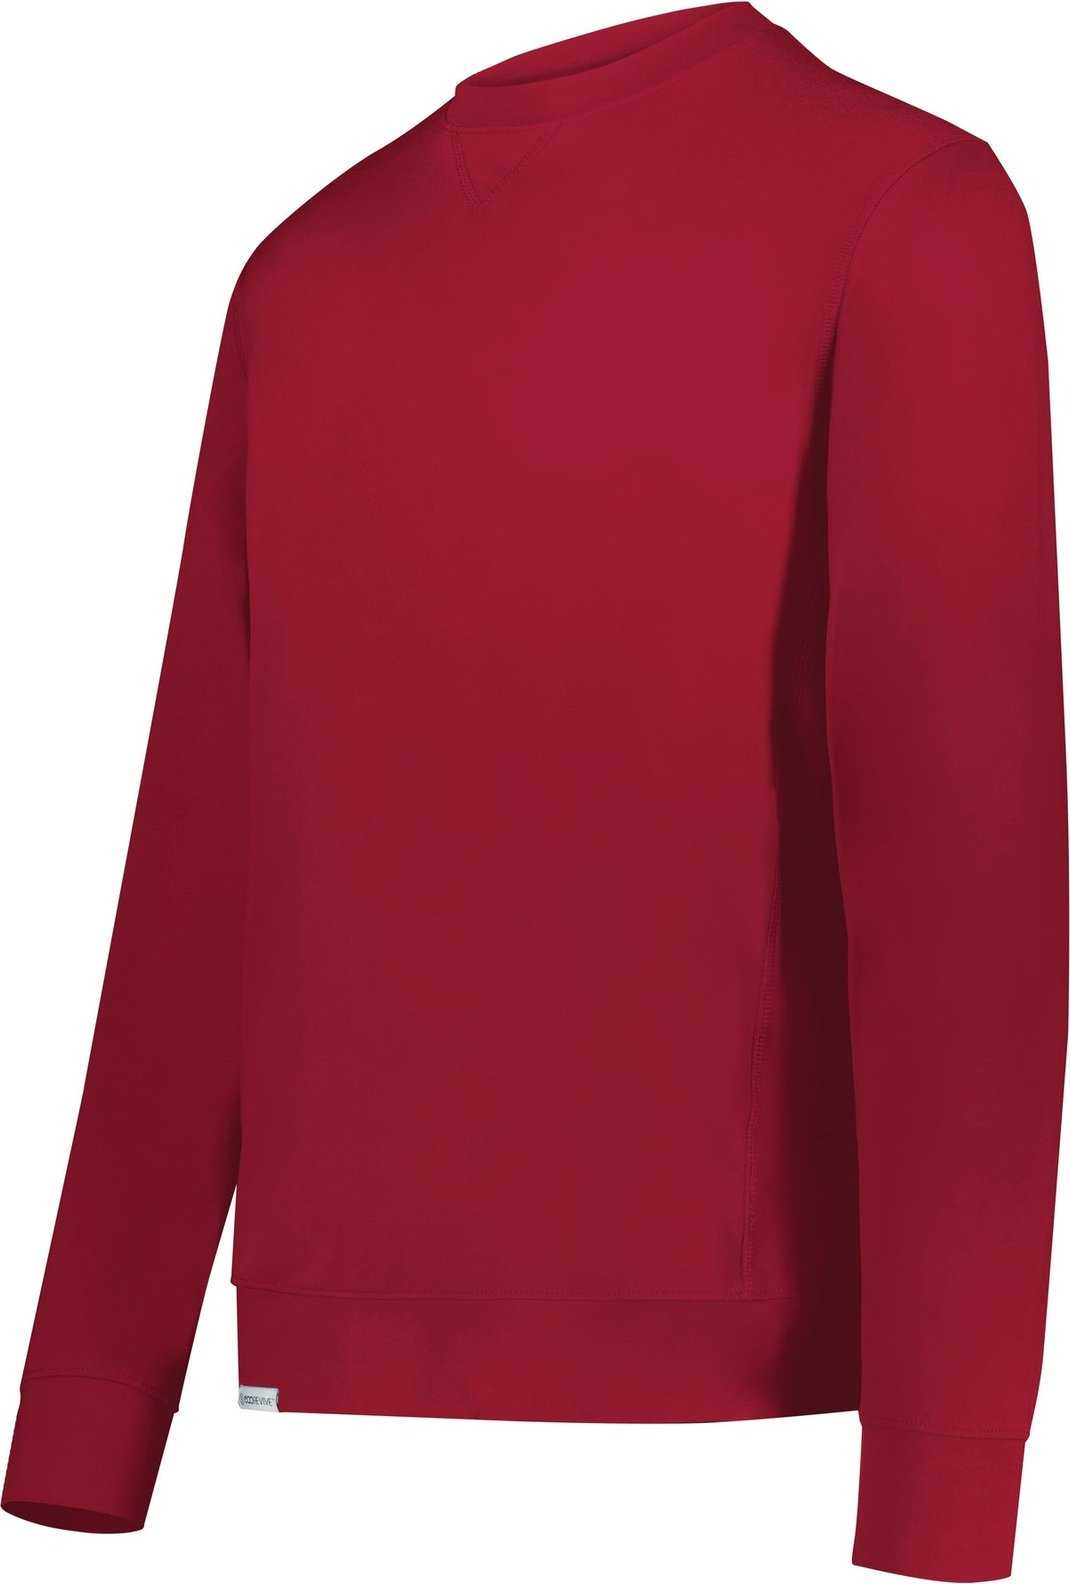 Holloway 223503 Ventura Soft Knit Crew - Scarlet - HIT a Double